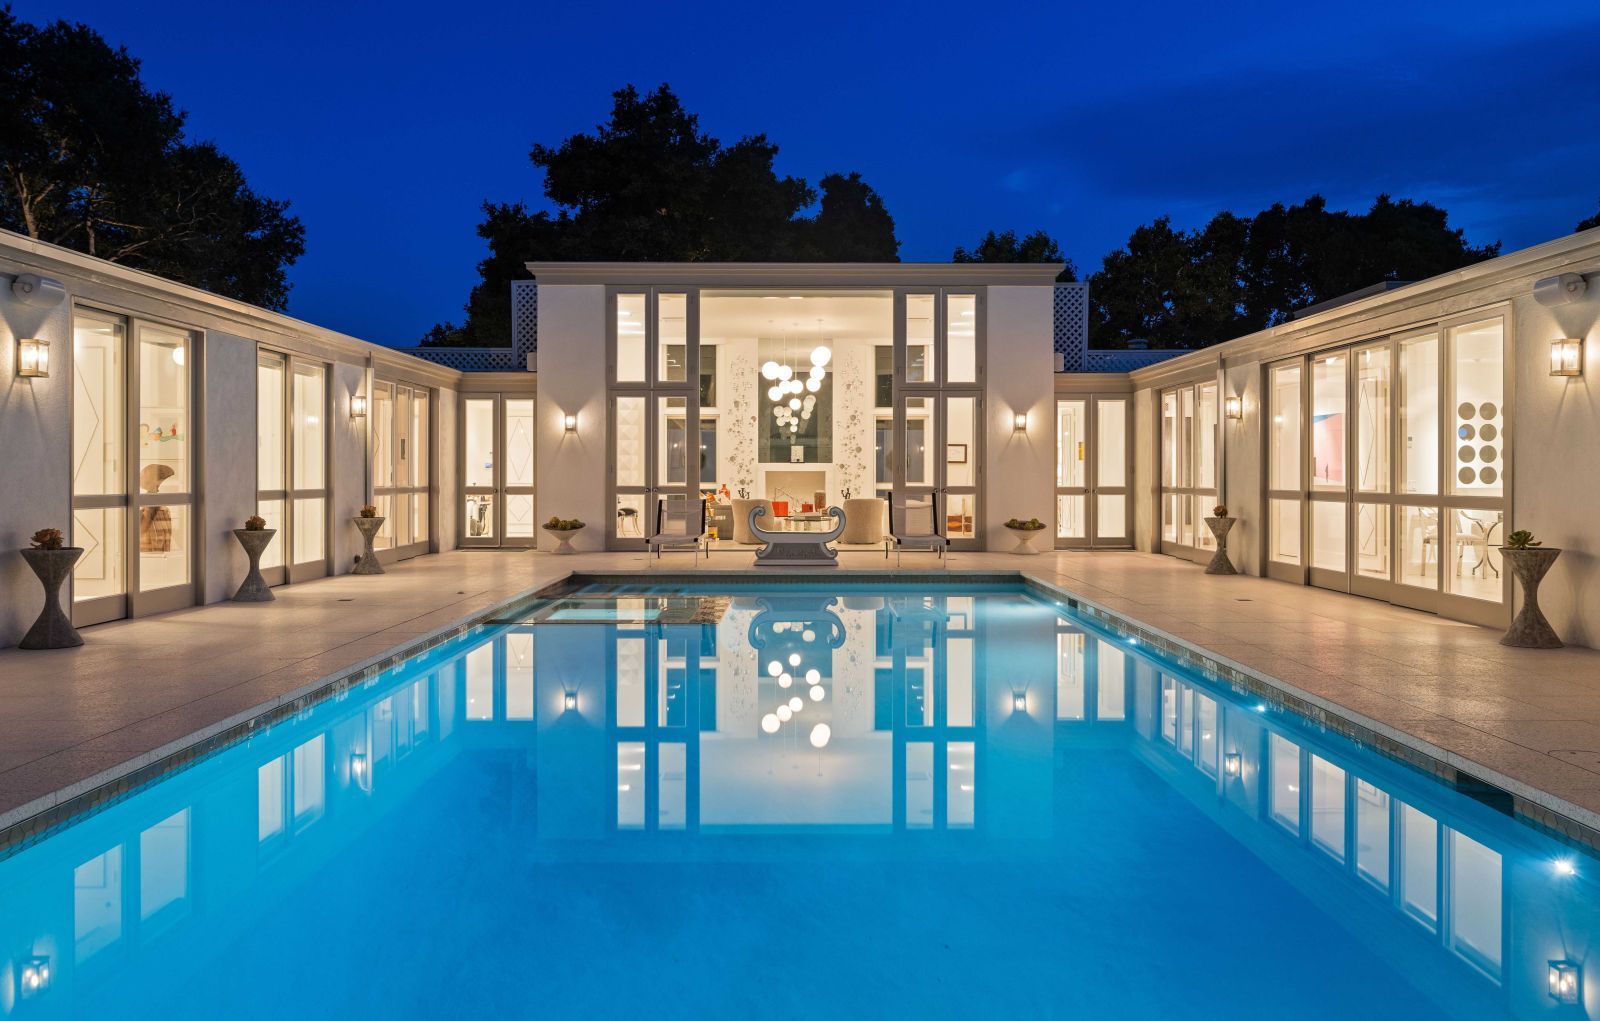 A sparkling blue pool surrounded by the windows of a Midcentury architectural masterpiece.